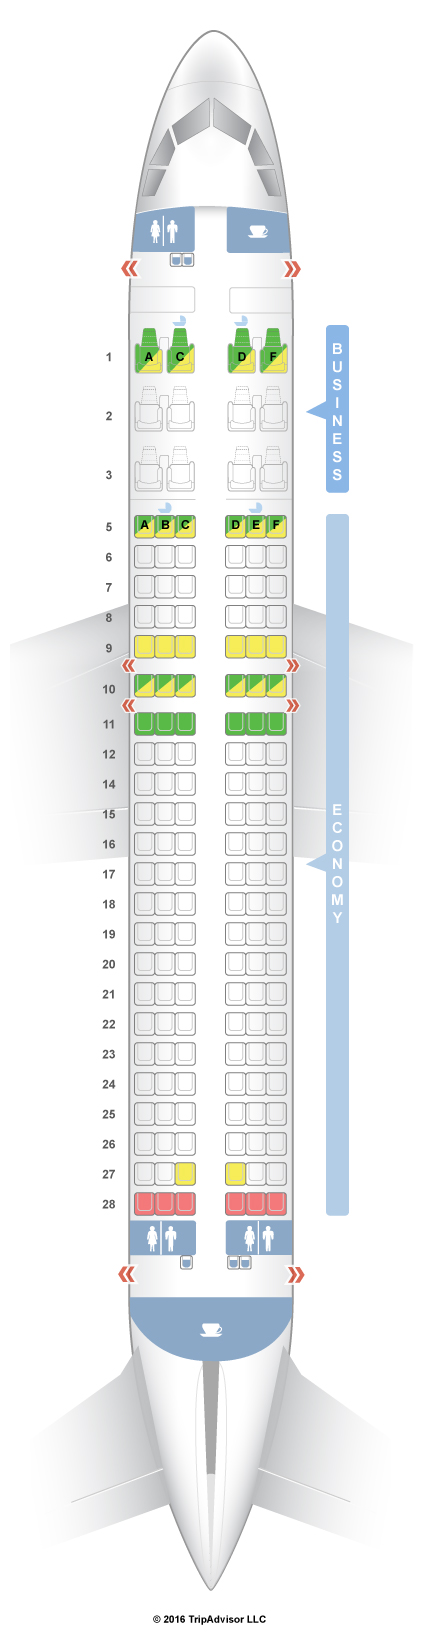 Airplane A320 Seating Chart